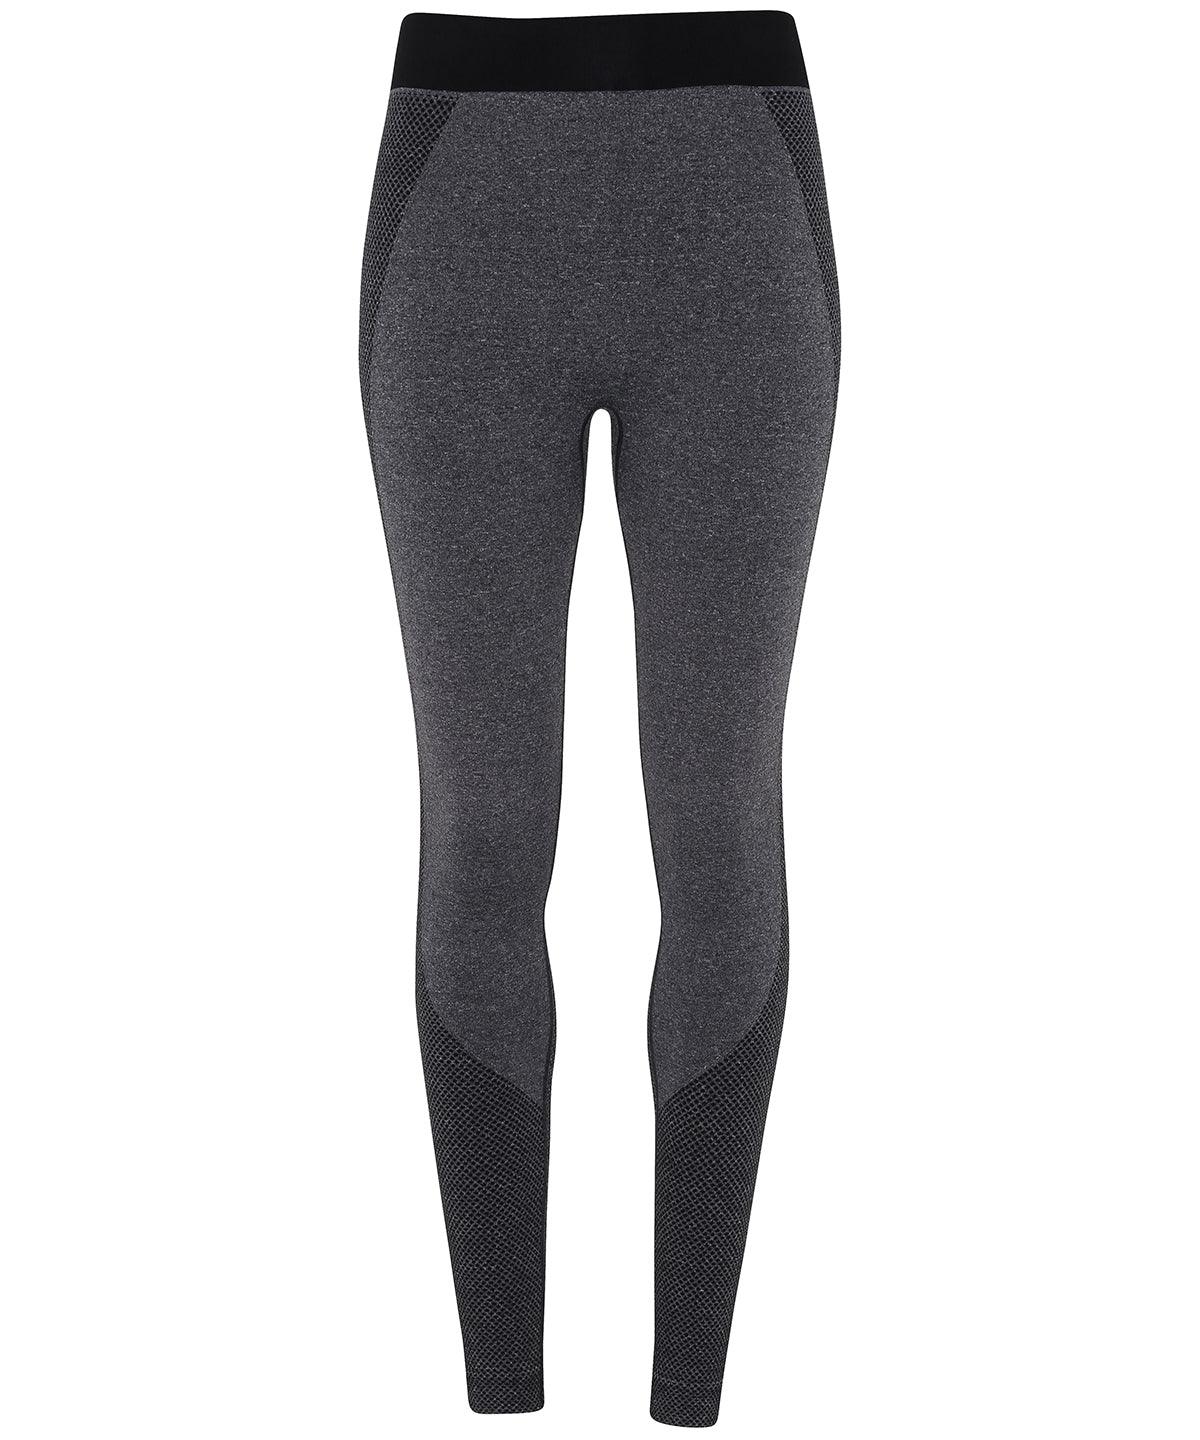 Black Melange - Women's TriDri® seamless '3D fit' multi-sport sculpt leggings Leggings TriDri® Activewear & Performance, Athleisurewear, Back to Fitness, Back to the Gym, Co-ords, Exclusives, Fashion Leggings, Leggings, Must Haves, Rebrandable, Sports & Leisure, Trousers & Shorts Schoolwear Centres